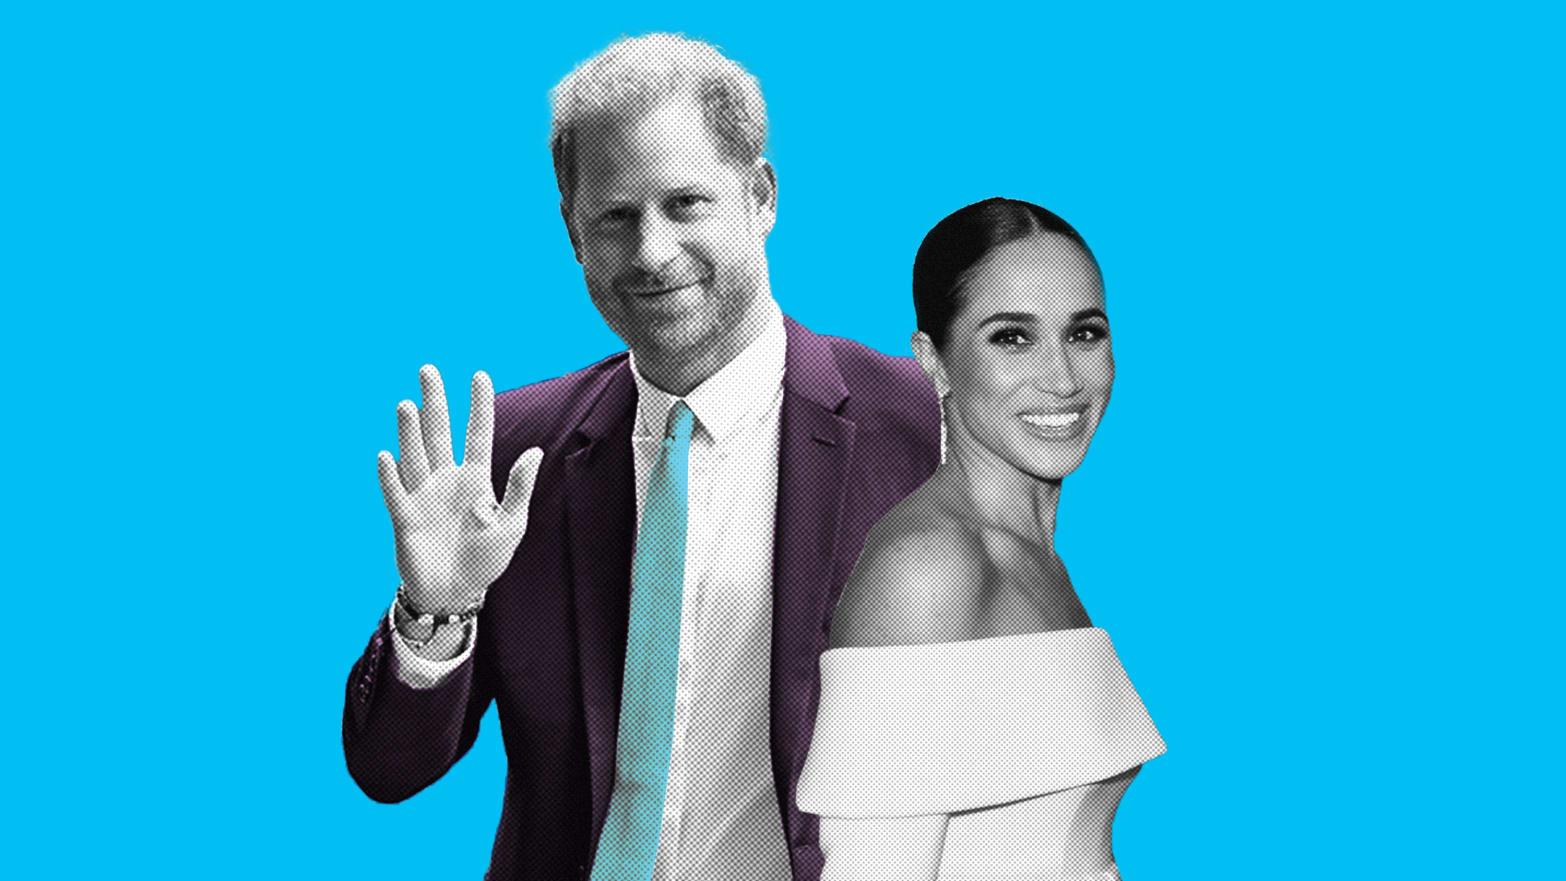 A photo illustration of Price Harry and Meghan Markle